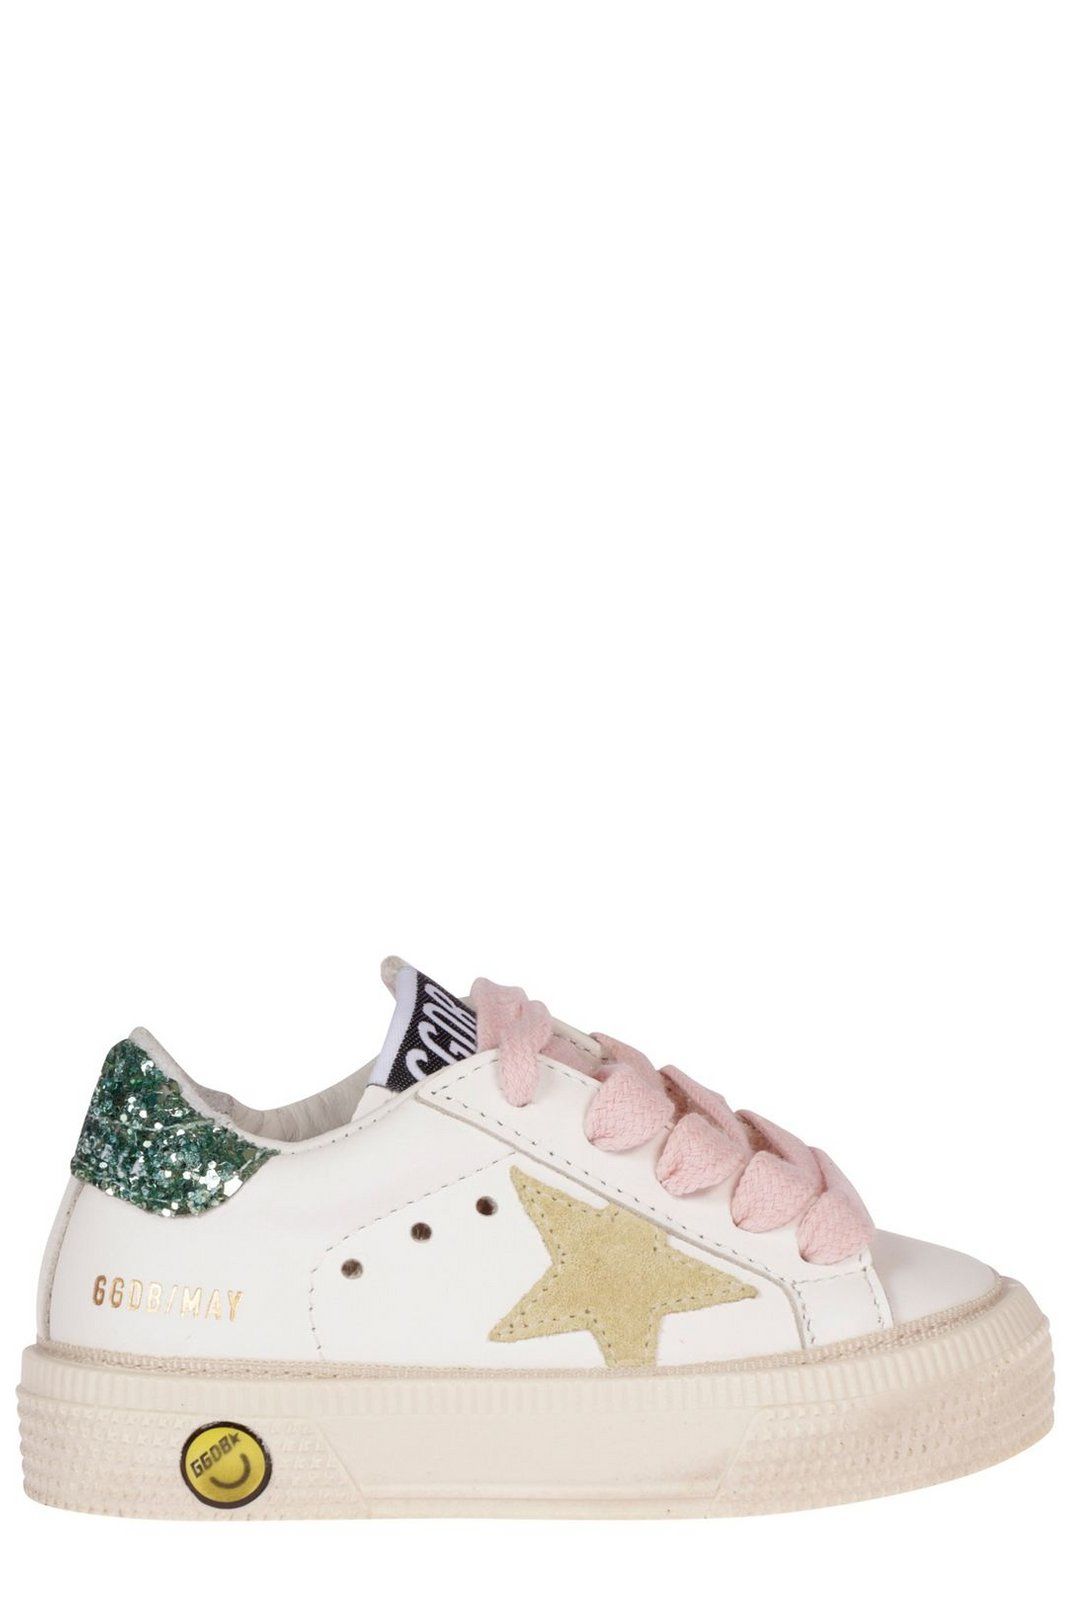 Golden Goose Kids Round Toe Lace-Up Sneakers | Cettire Global